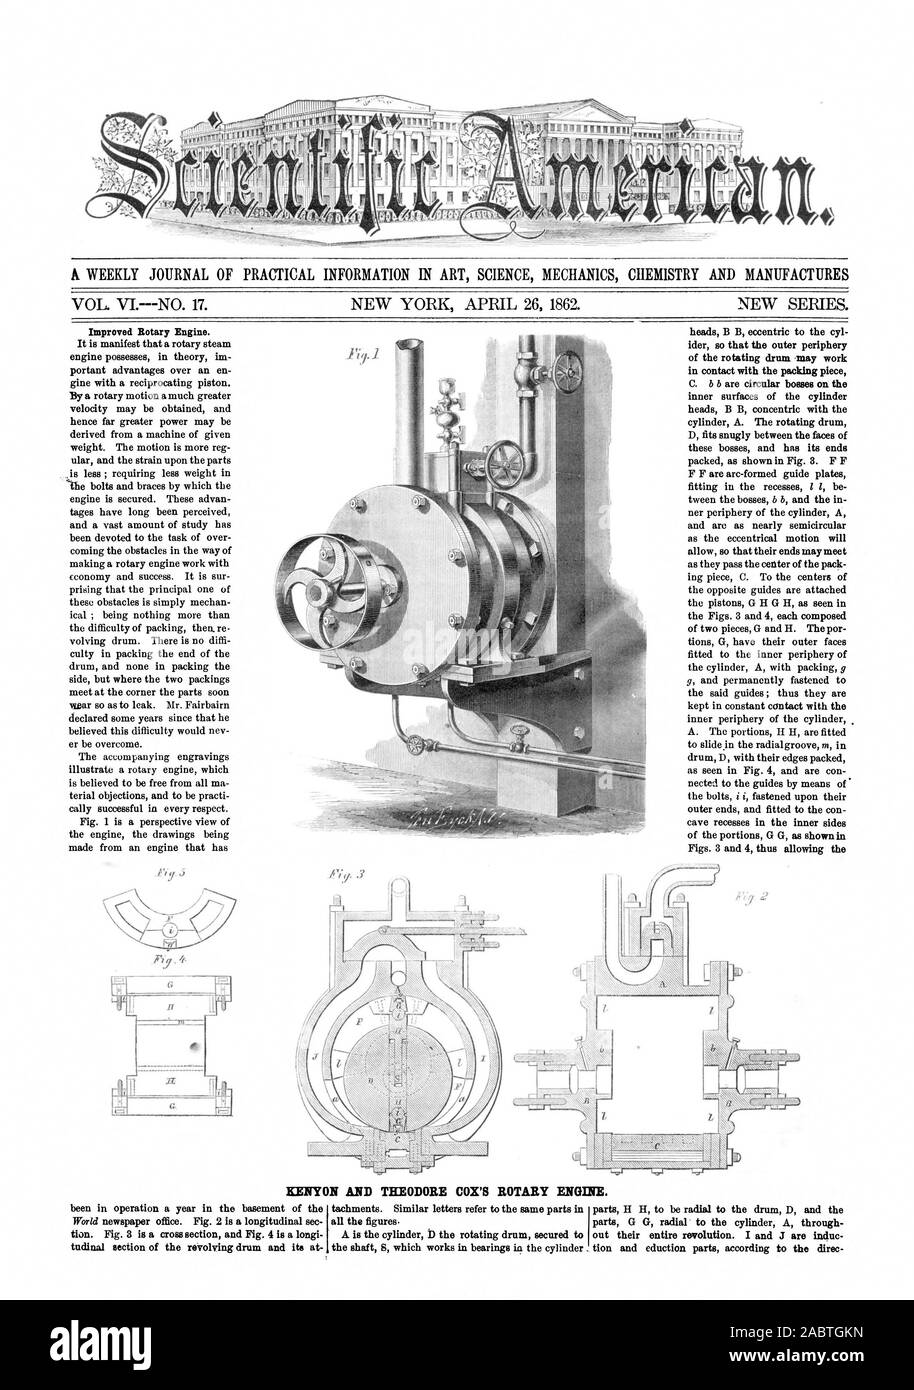 KENYON AND THEODORE COX'S ROTARY ENGINE., scientific american, 1862-04-26 Stock Photo